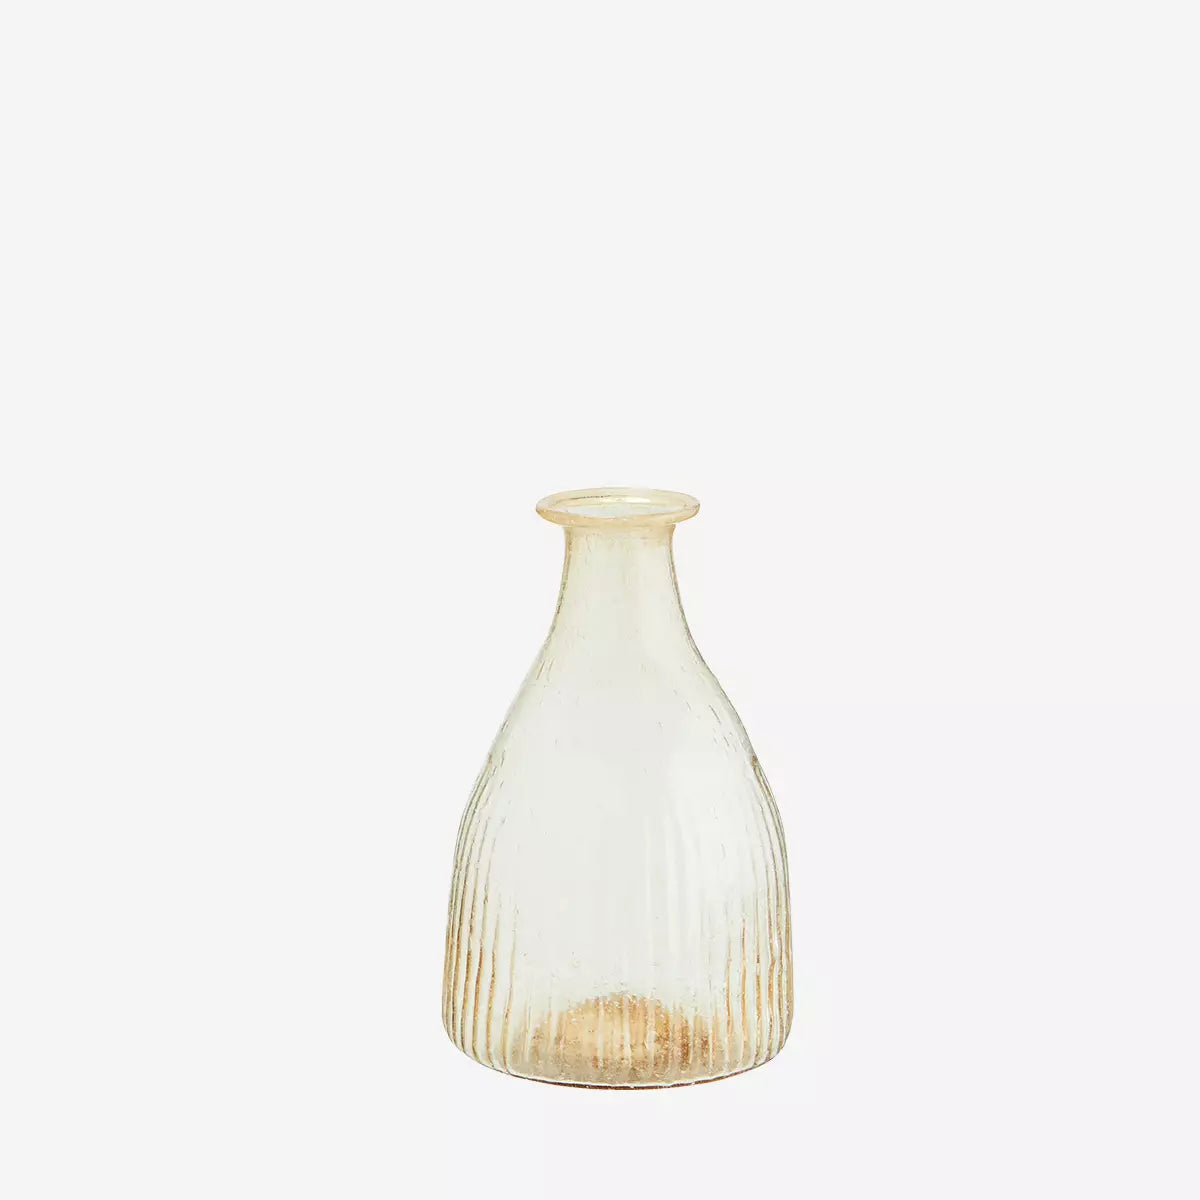 Recycled glass vase ligth peach